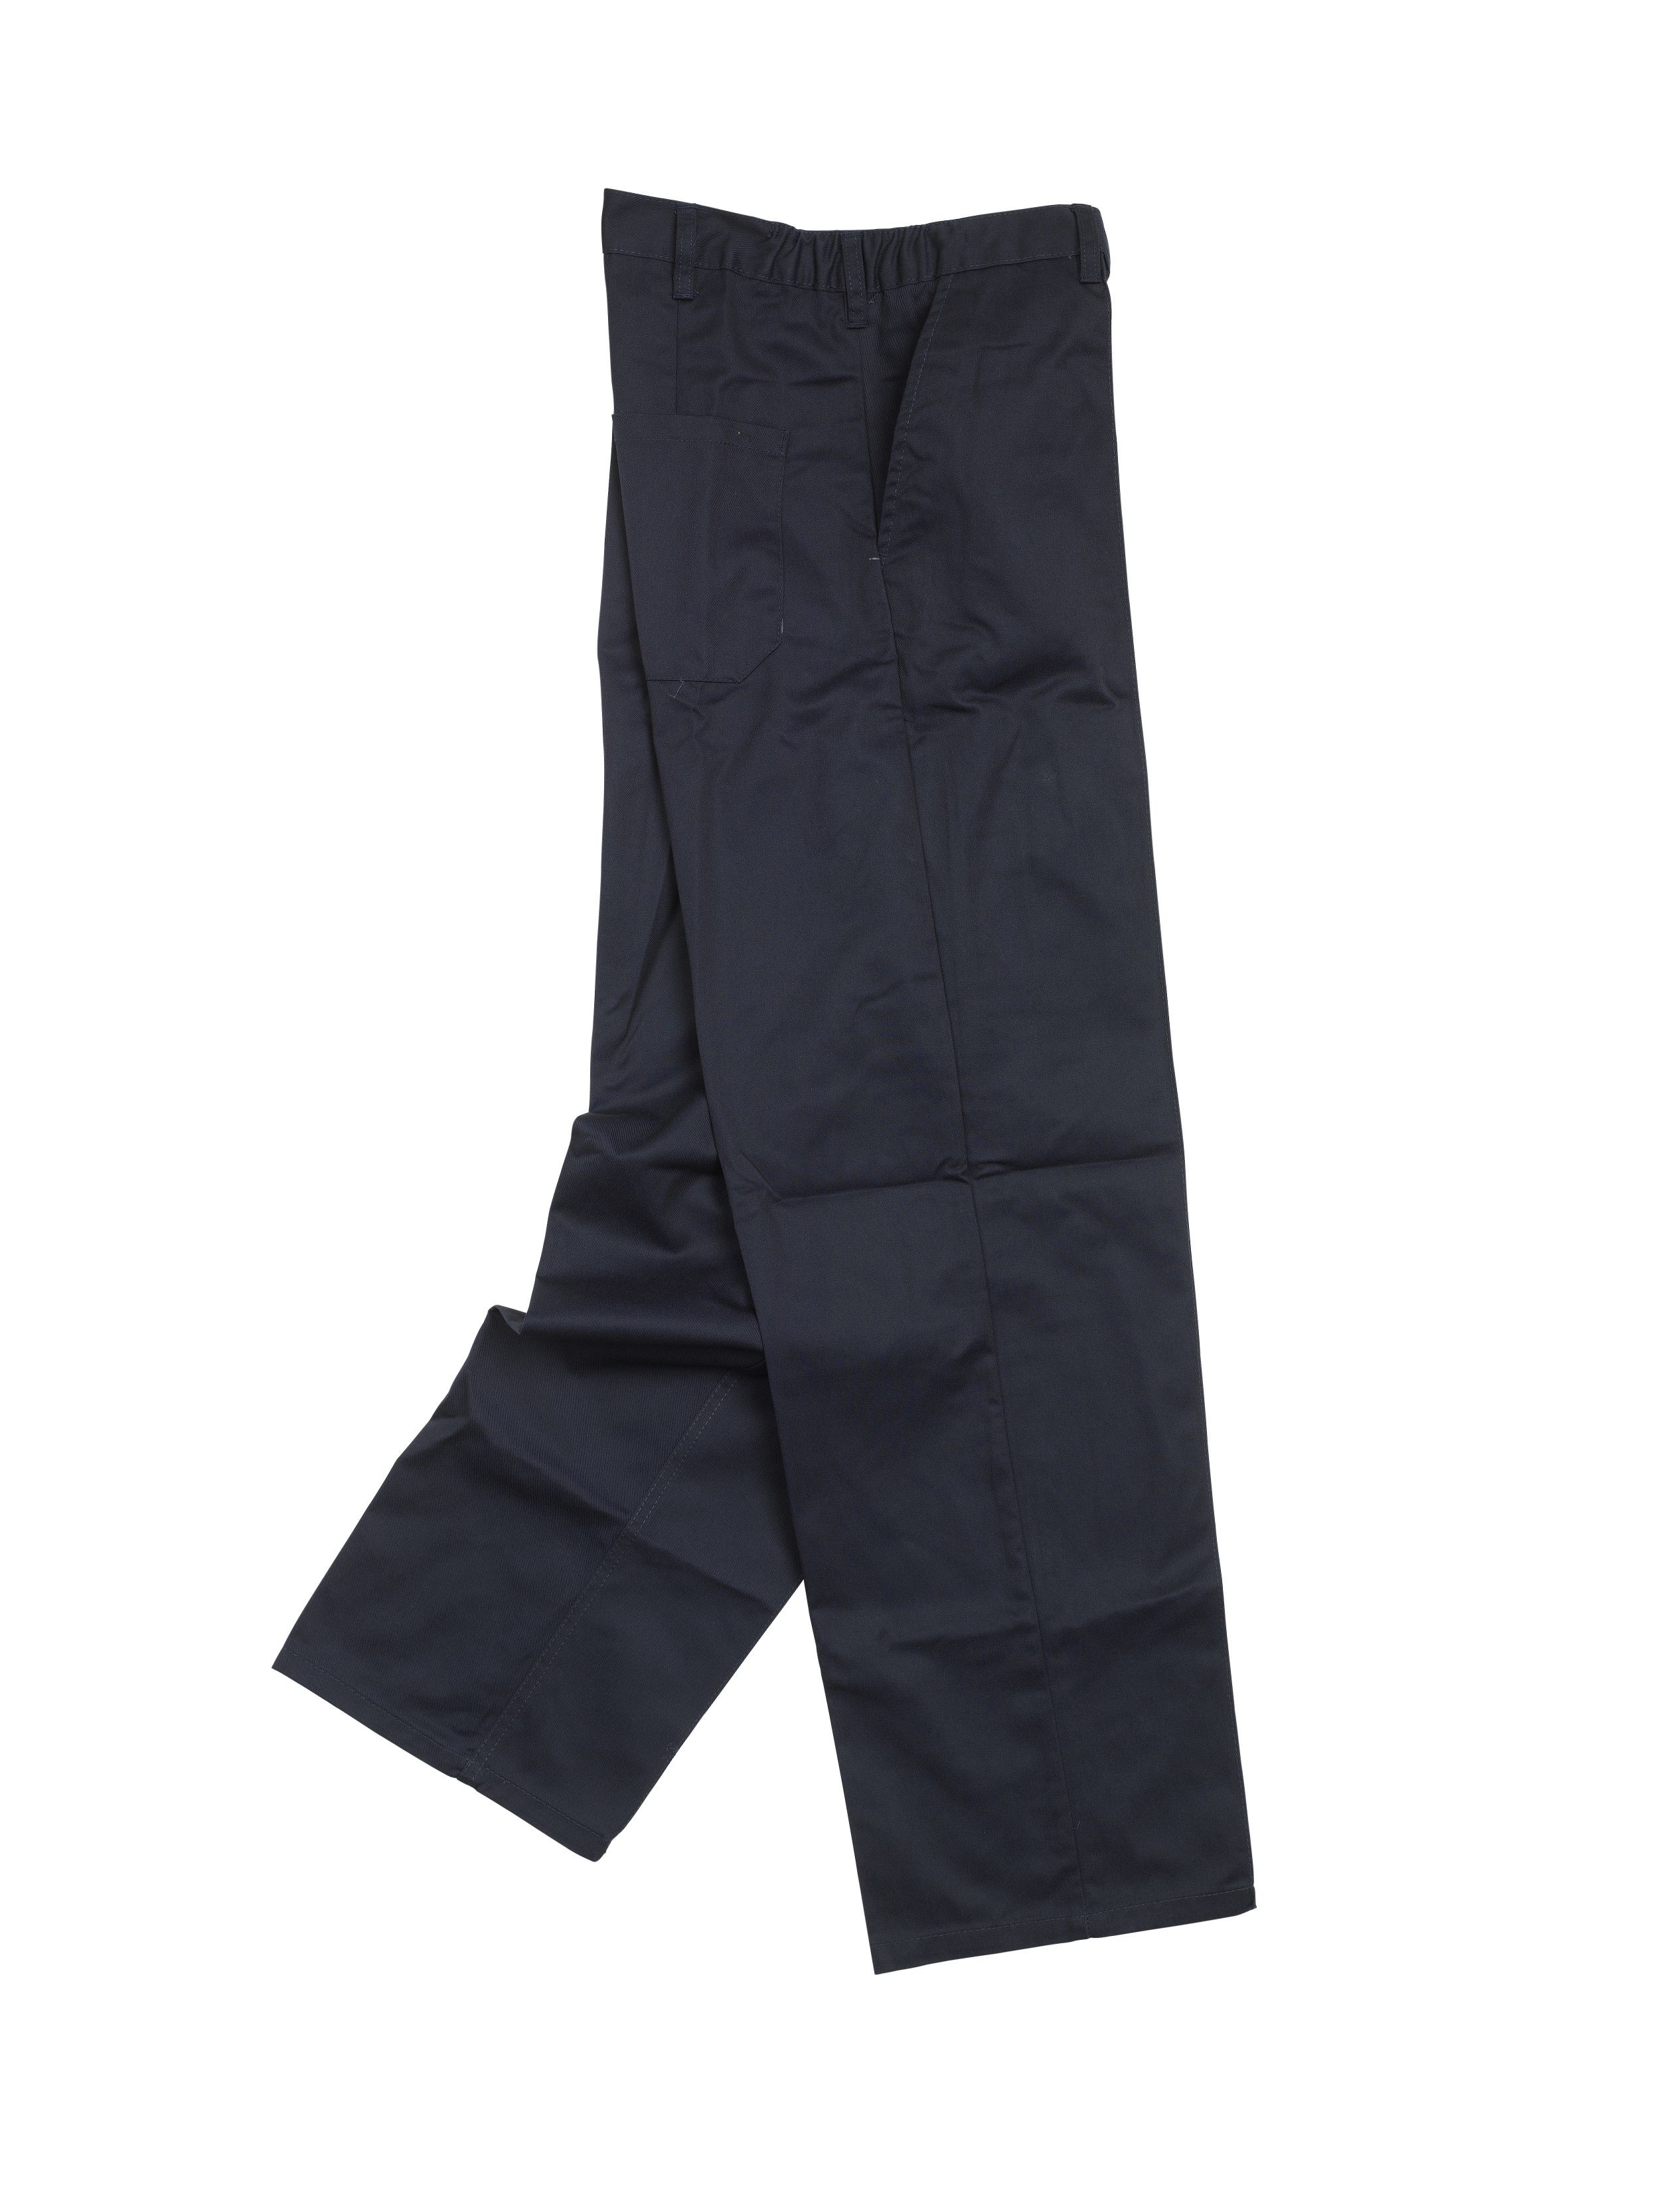 TROUSER - SEWN IN SEAM | Warrior Protects